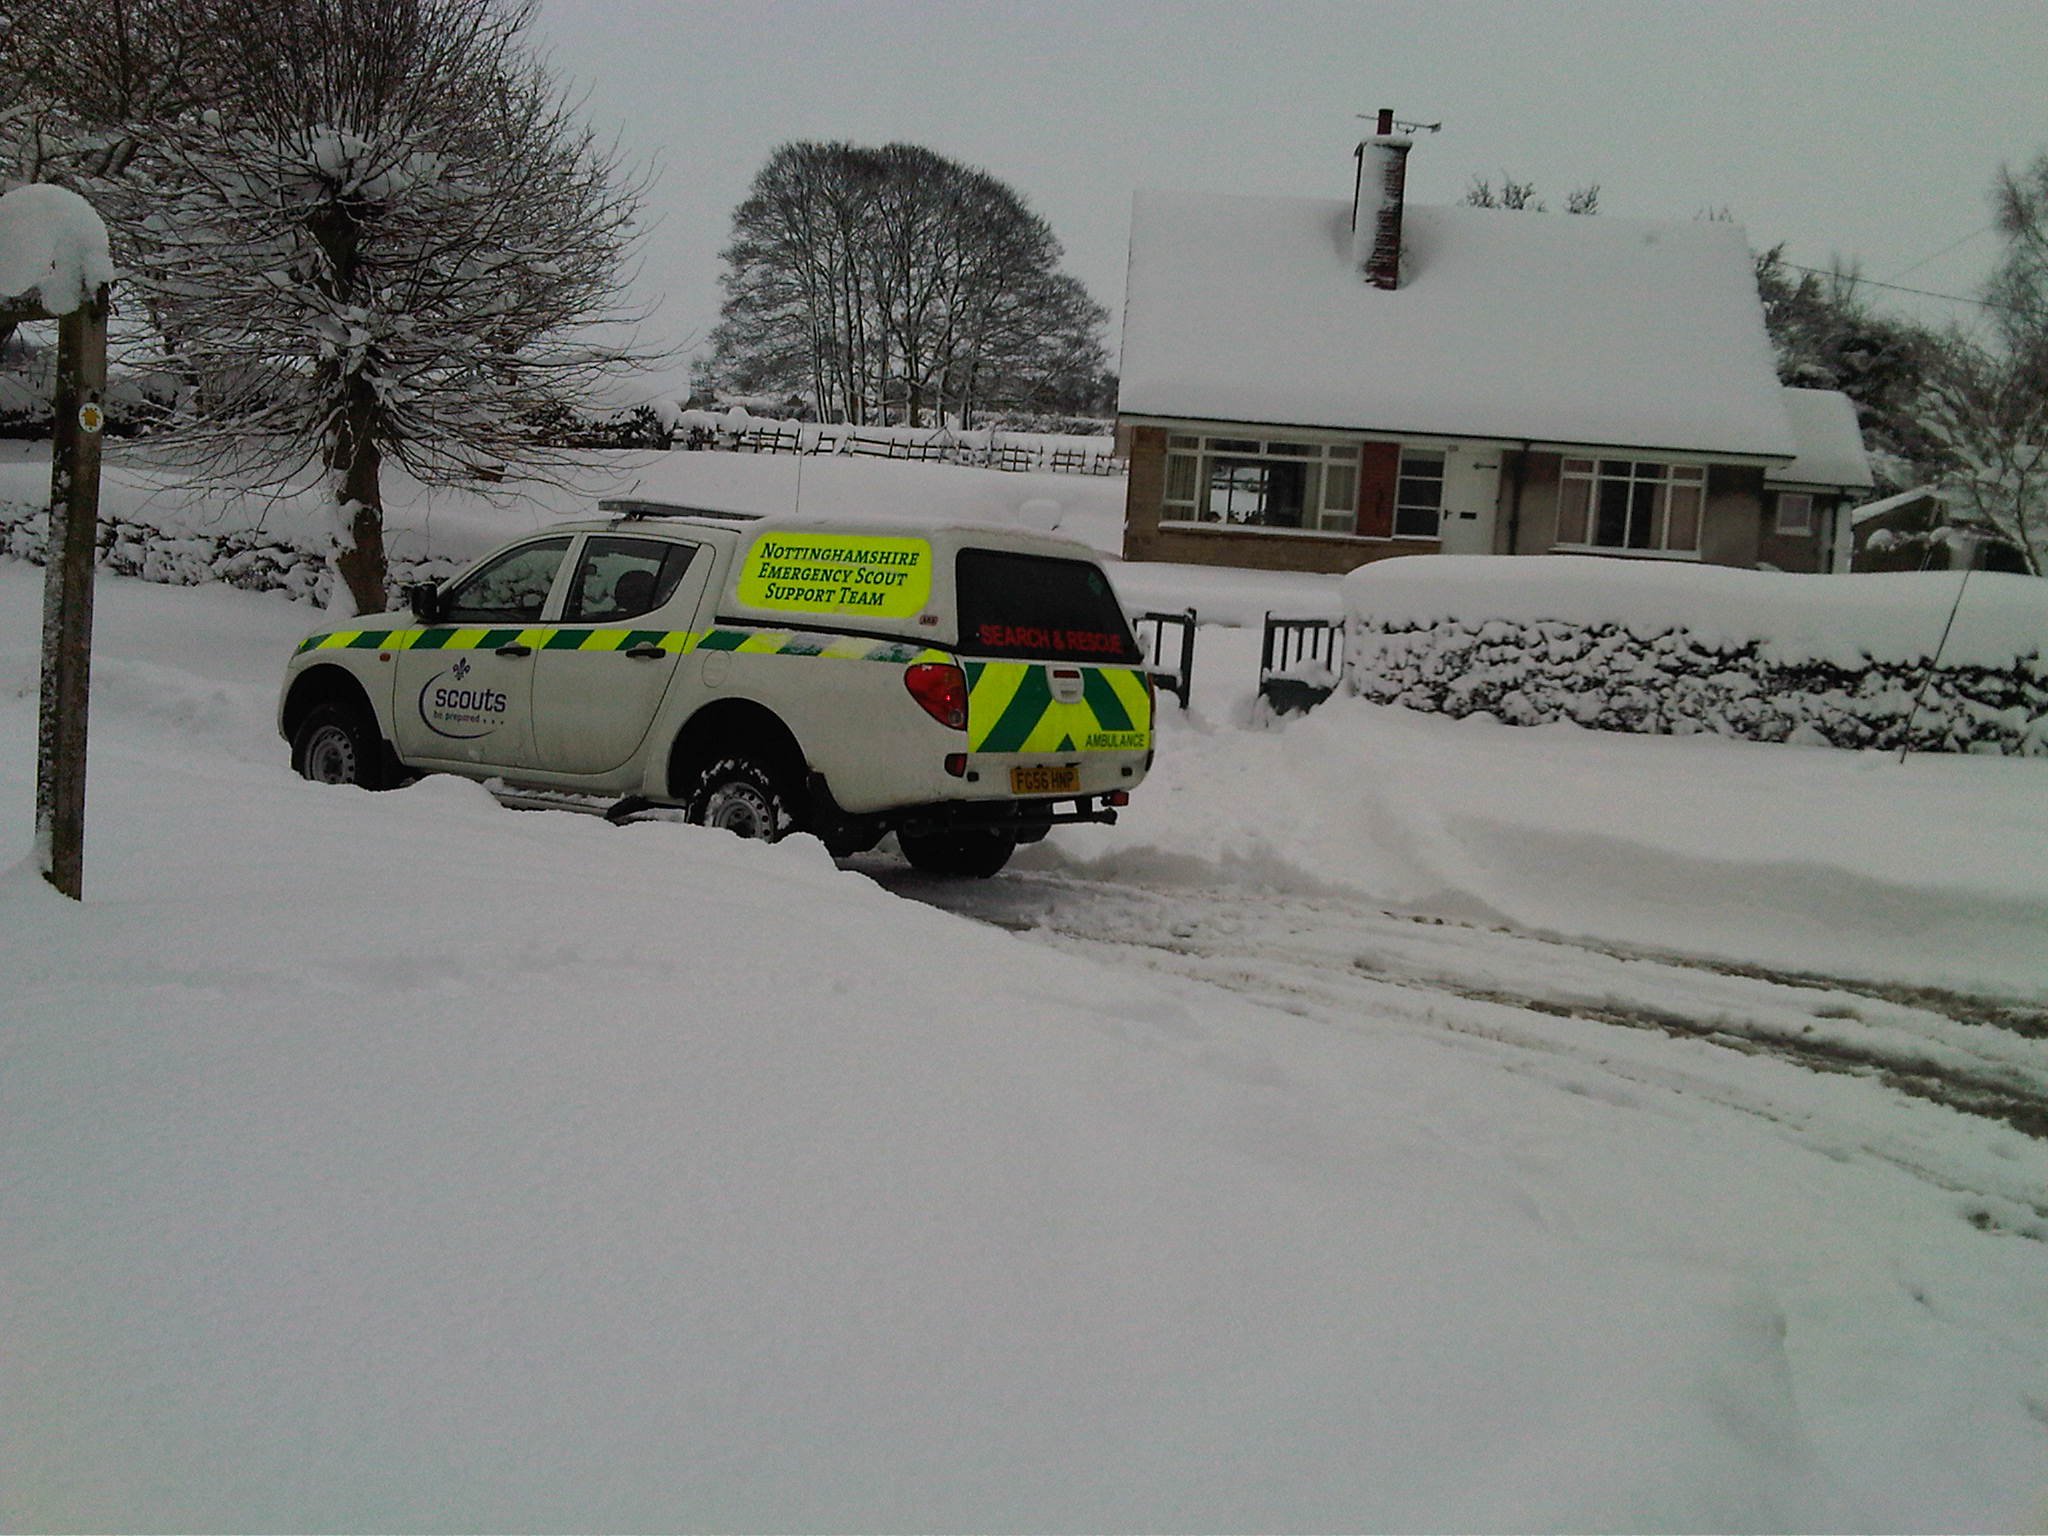 Our support unit in the snow